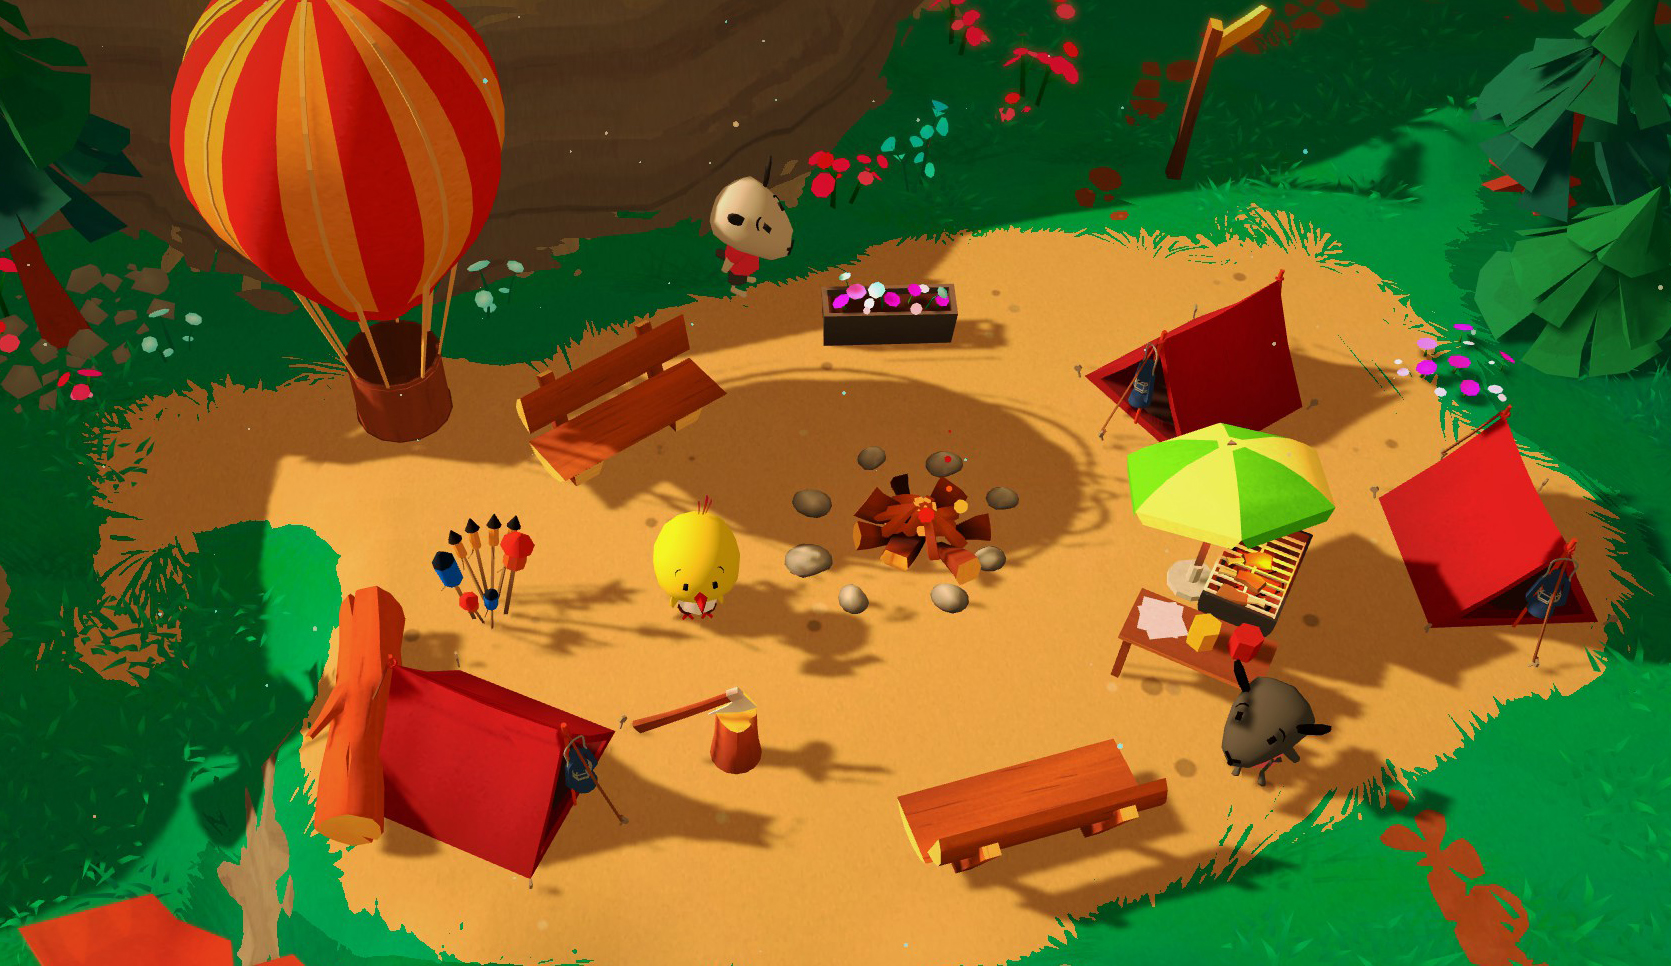 Haven Park - a yellow bird sits at a bright colored campsite